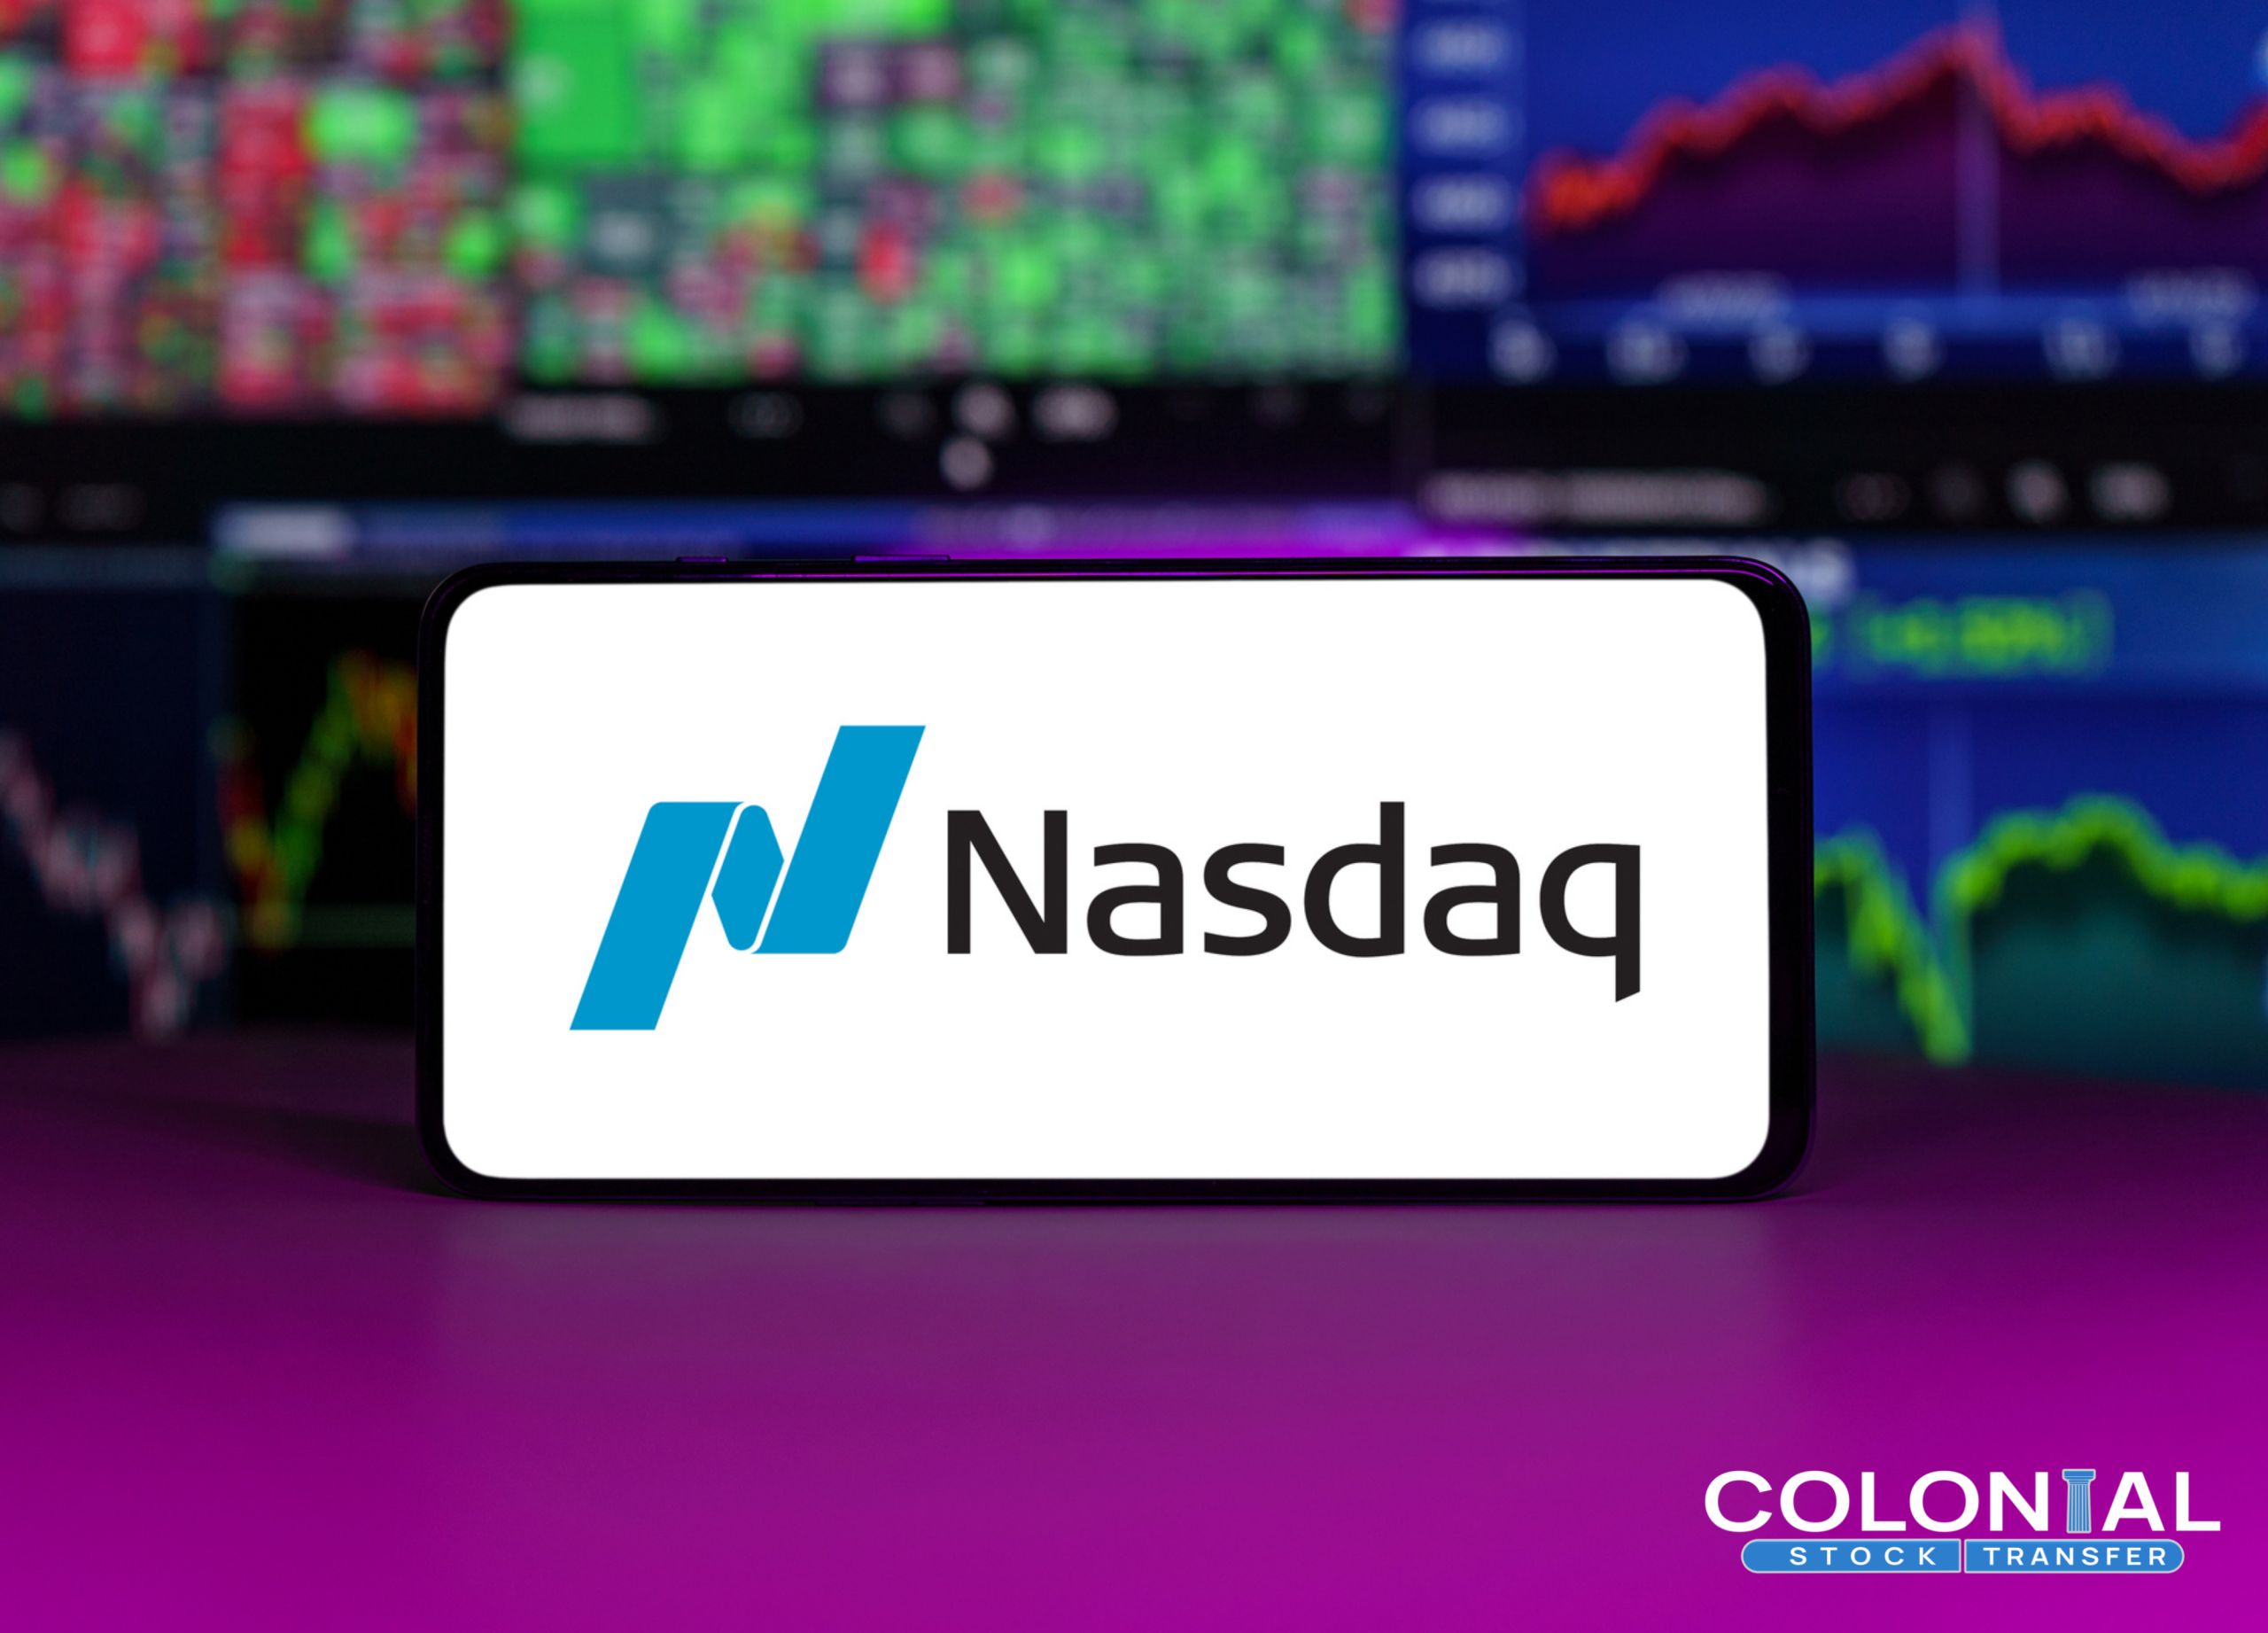 Nasdaq Proposed Rule Changes To Its Discretionary Listing And Continued Listing Standards